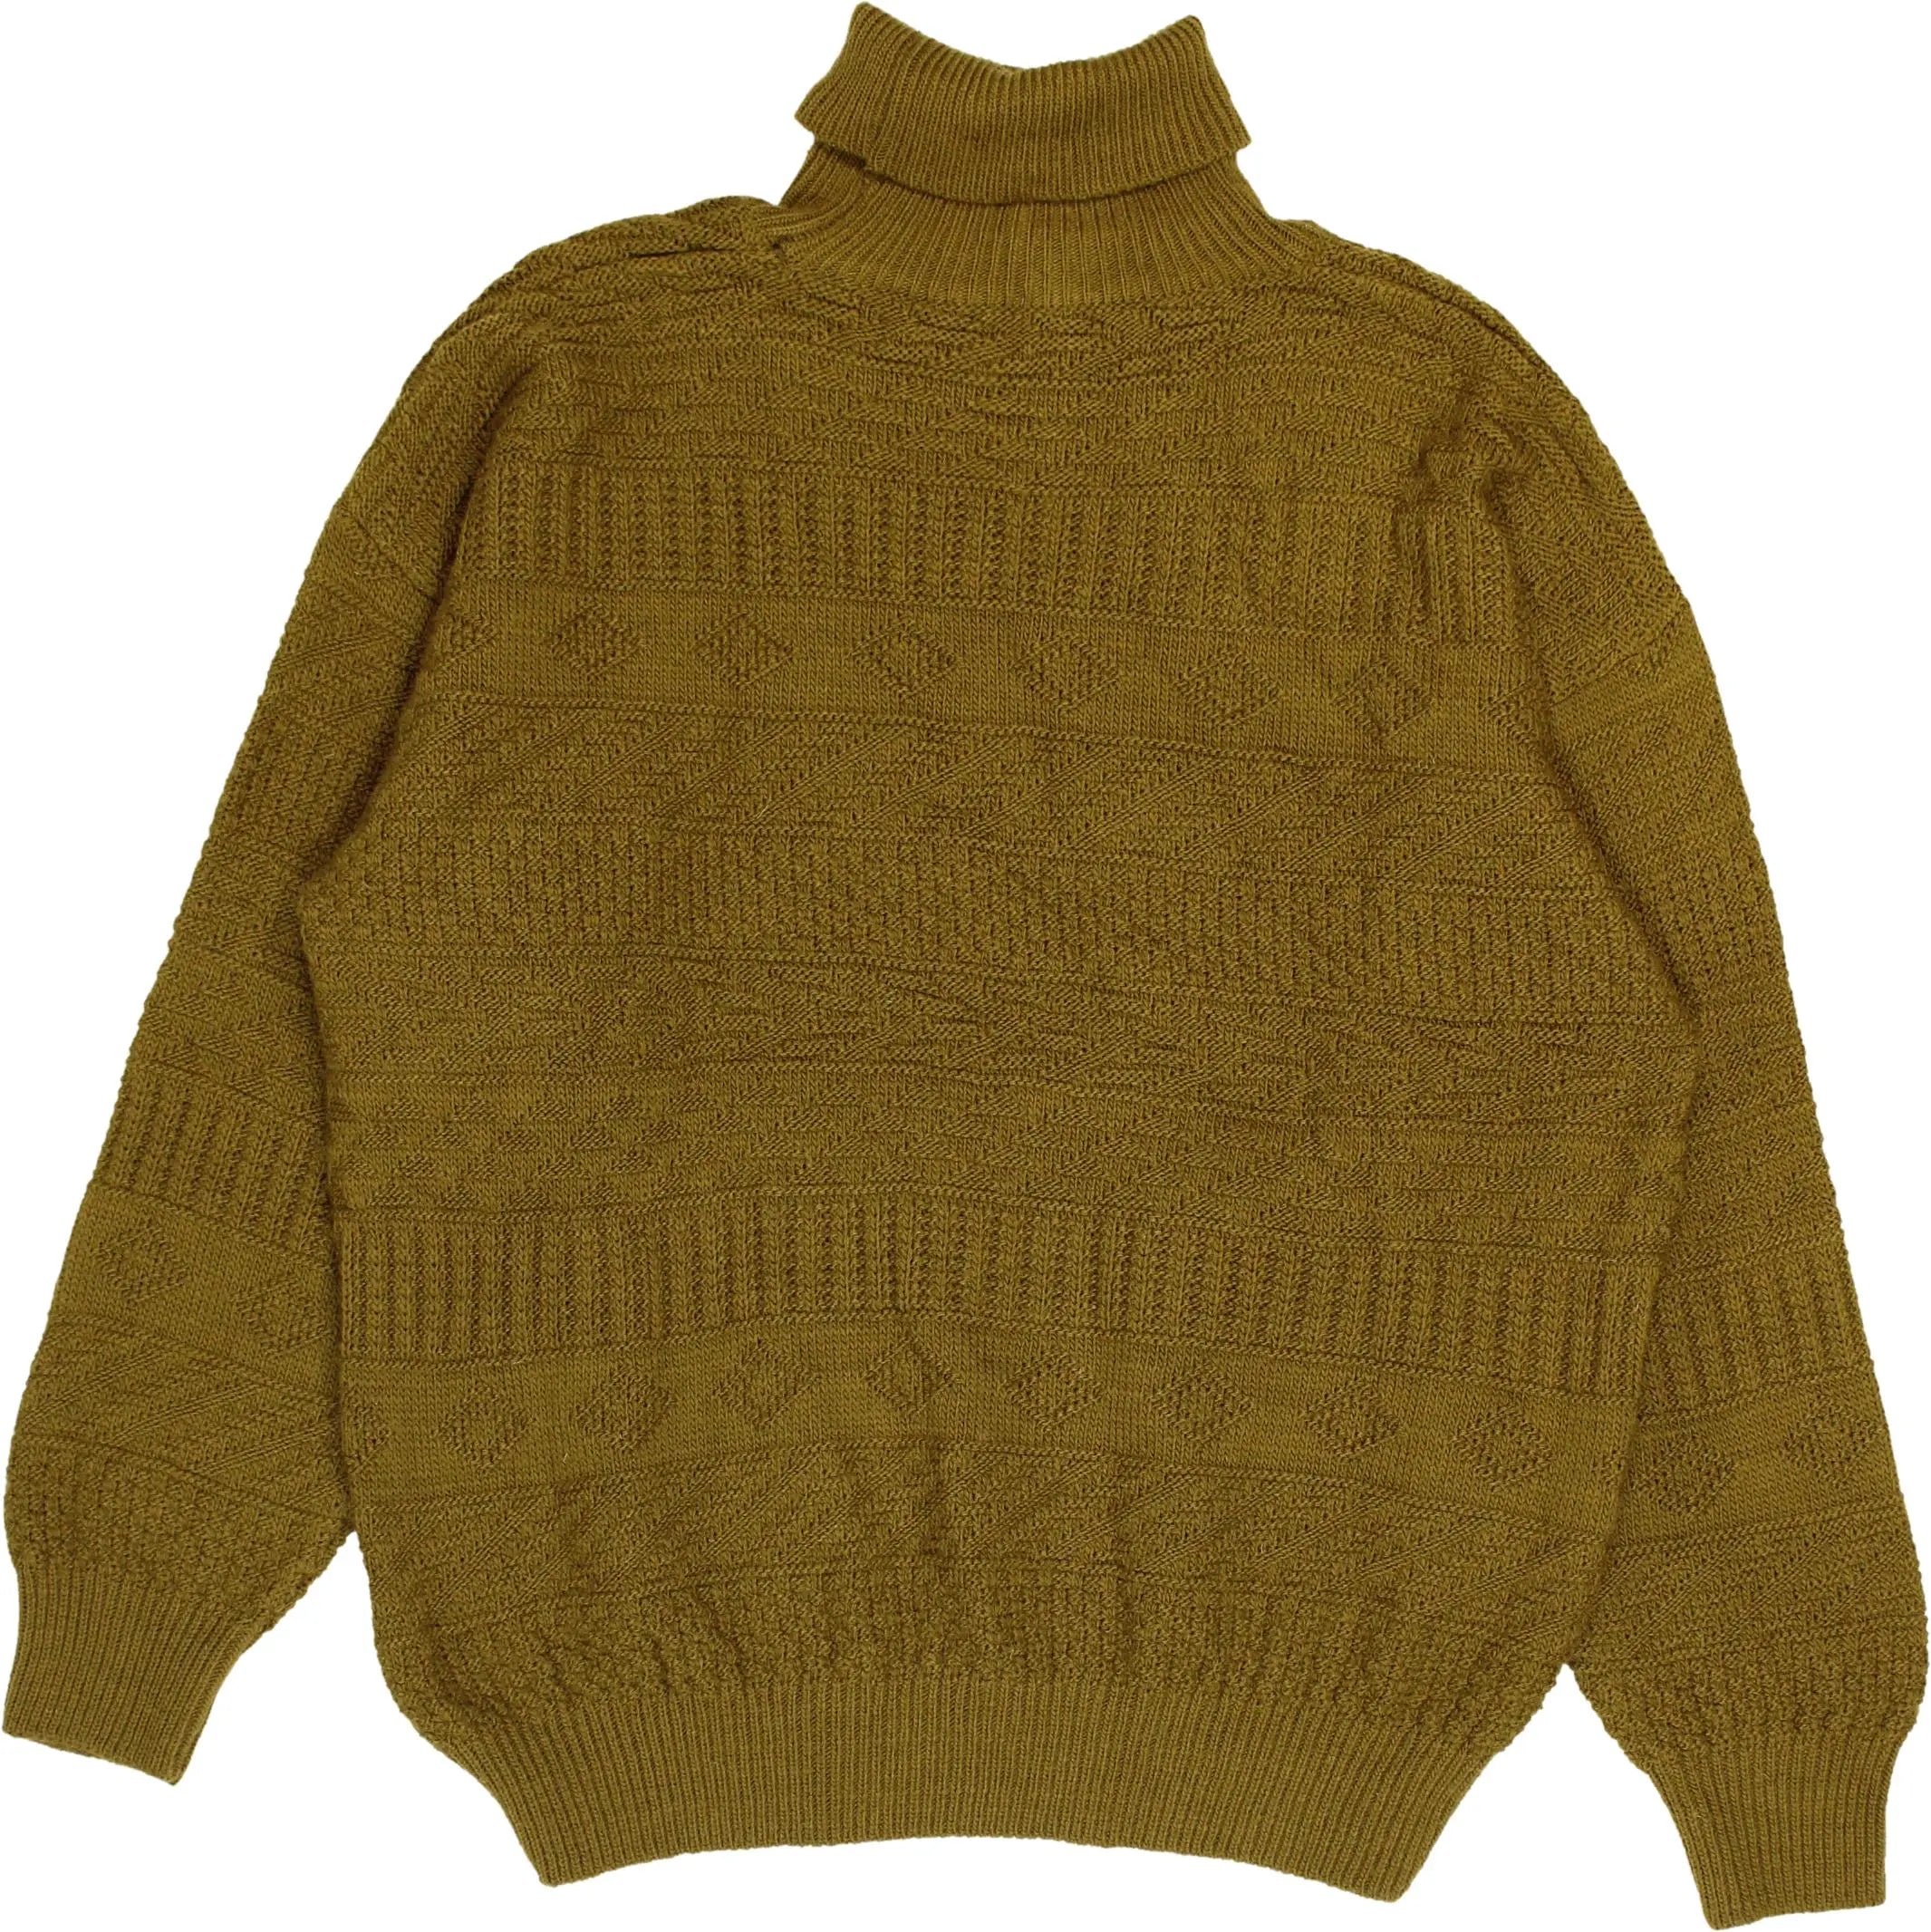 Unknown - 90s Knitted Turtleneck Jumper- ThriftTale.com - Vintage and second handclothing